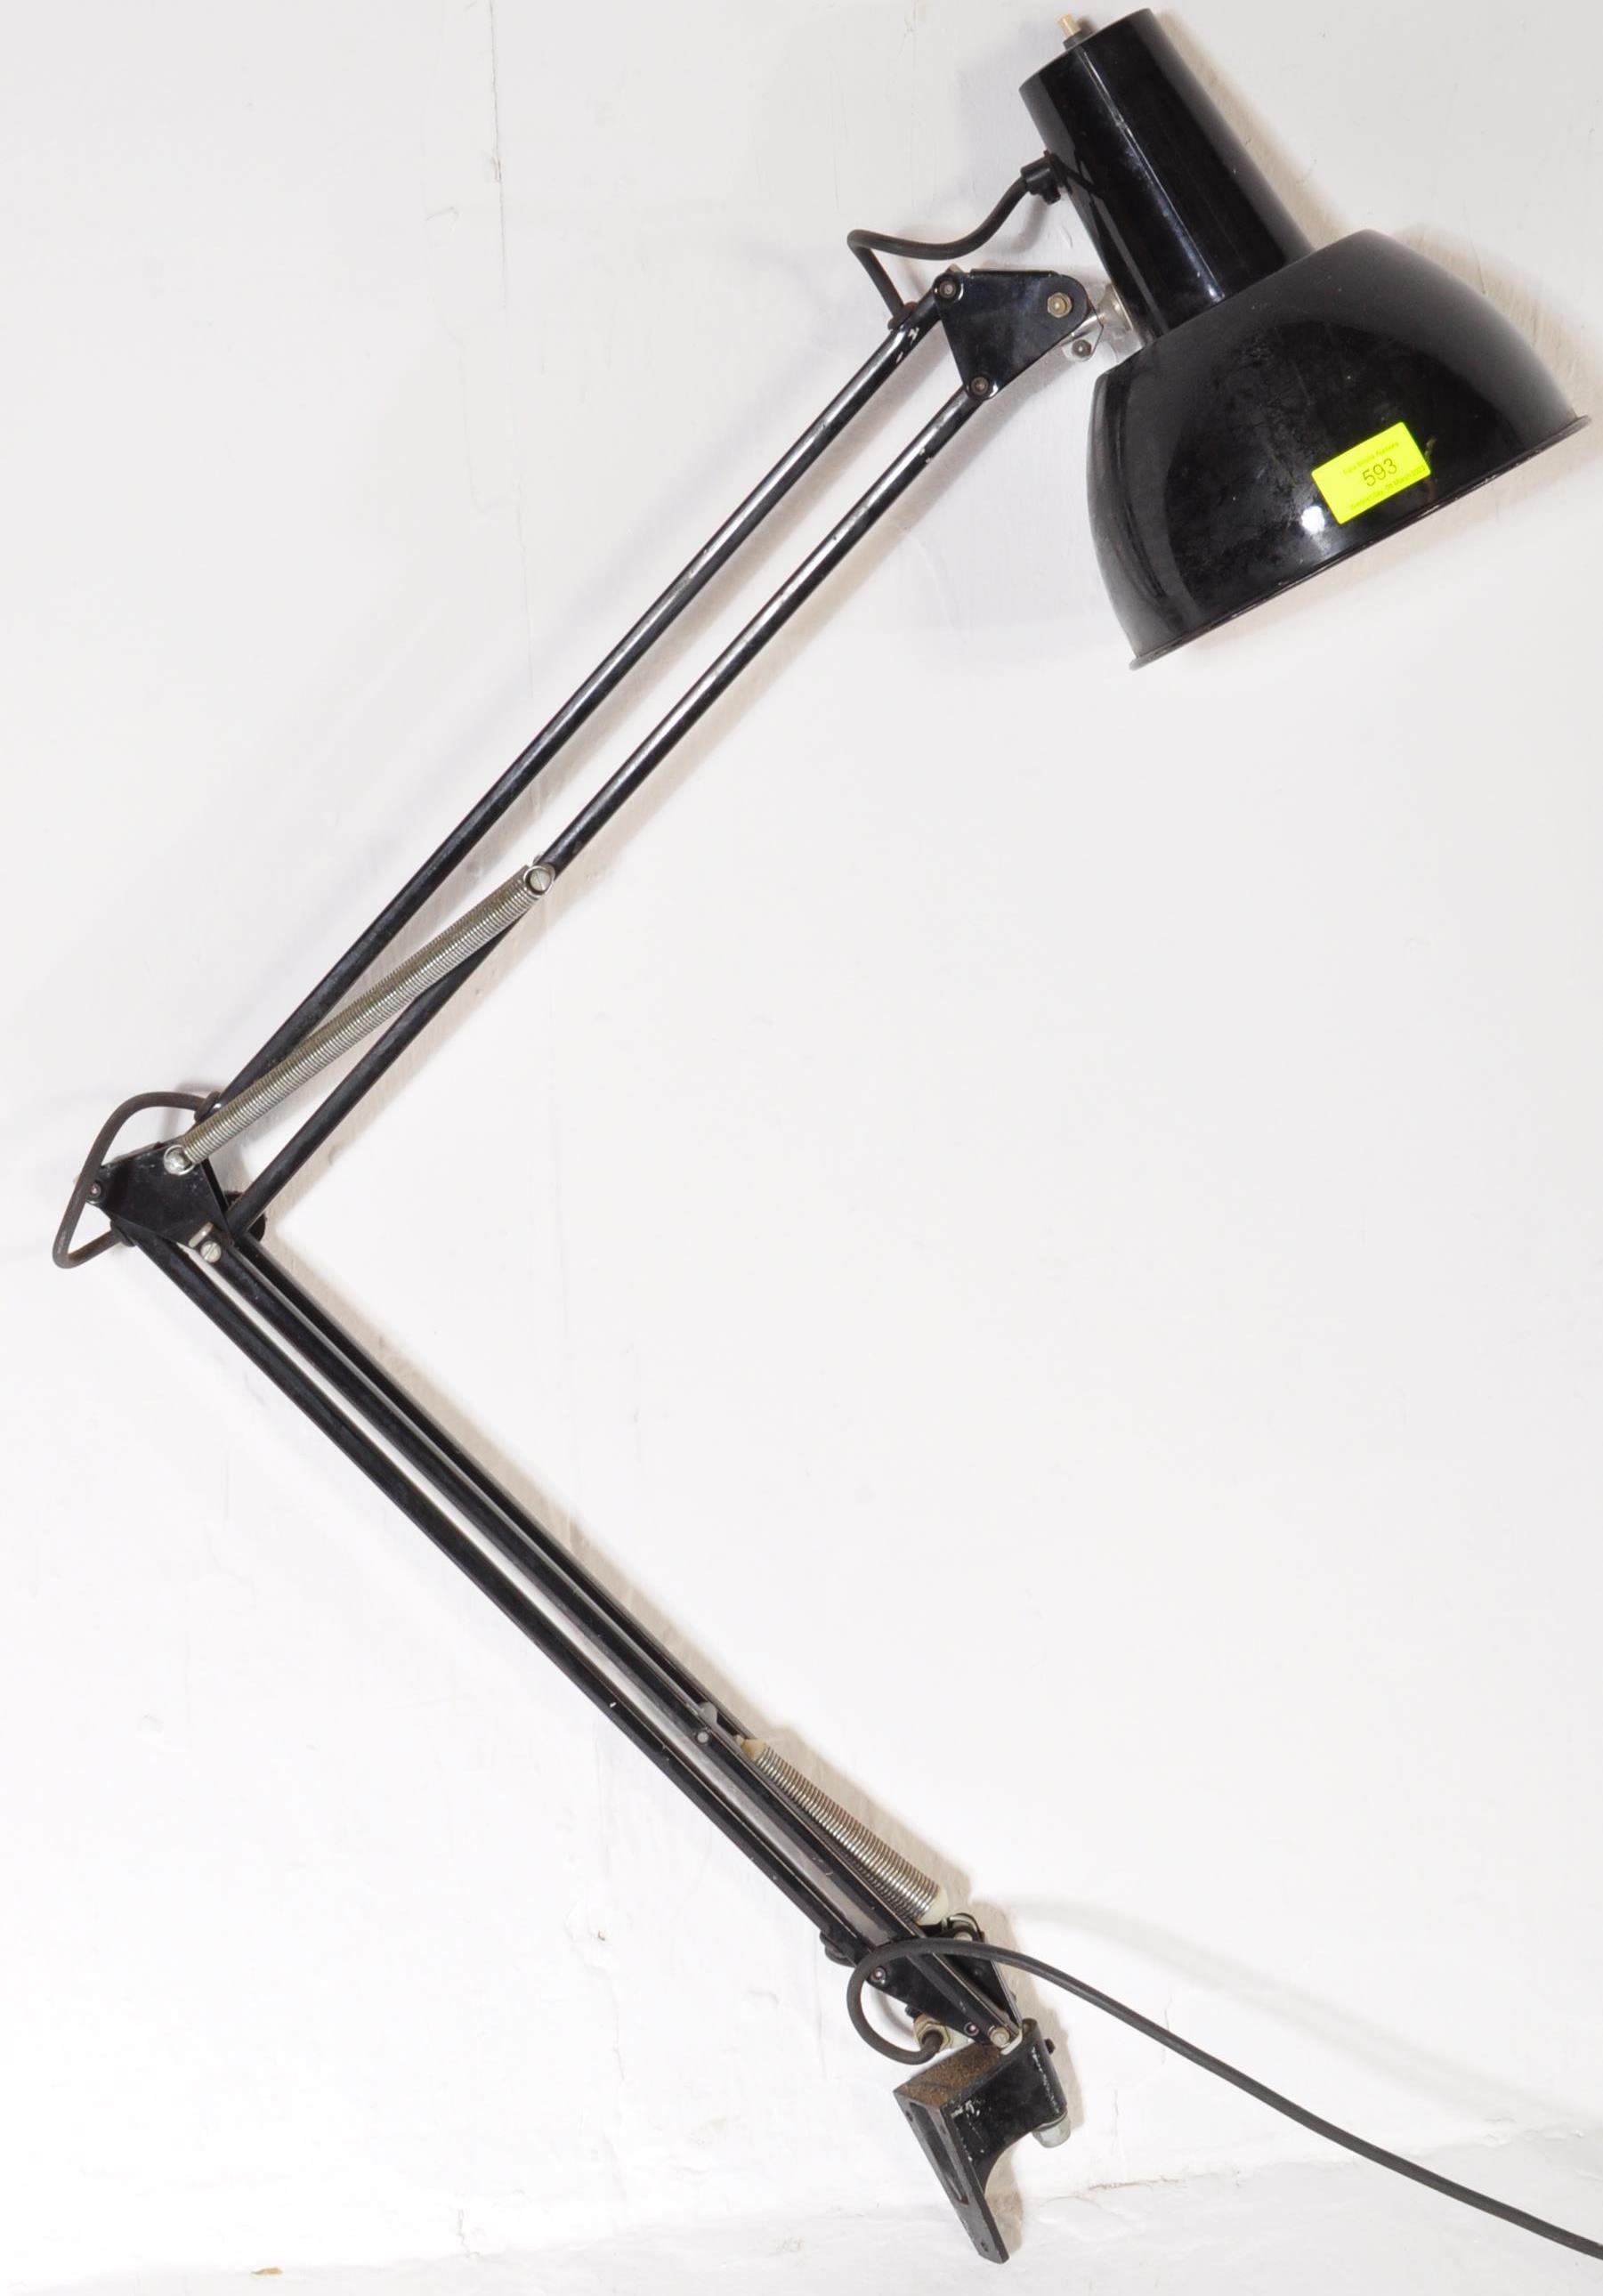 MID CENTURY 1960S BLACK ANGLEPOISE WALL MOUNTED LAMP - Image 2 of 5